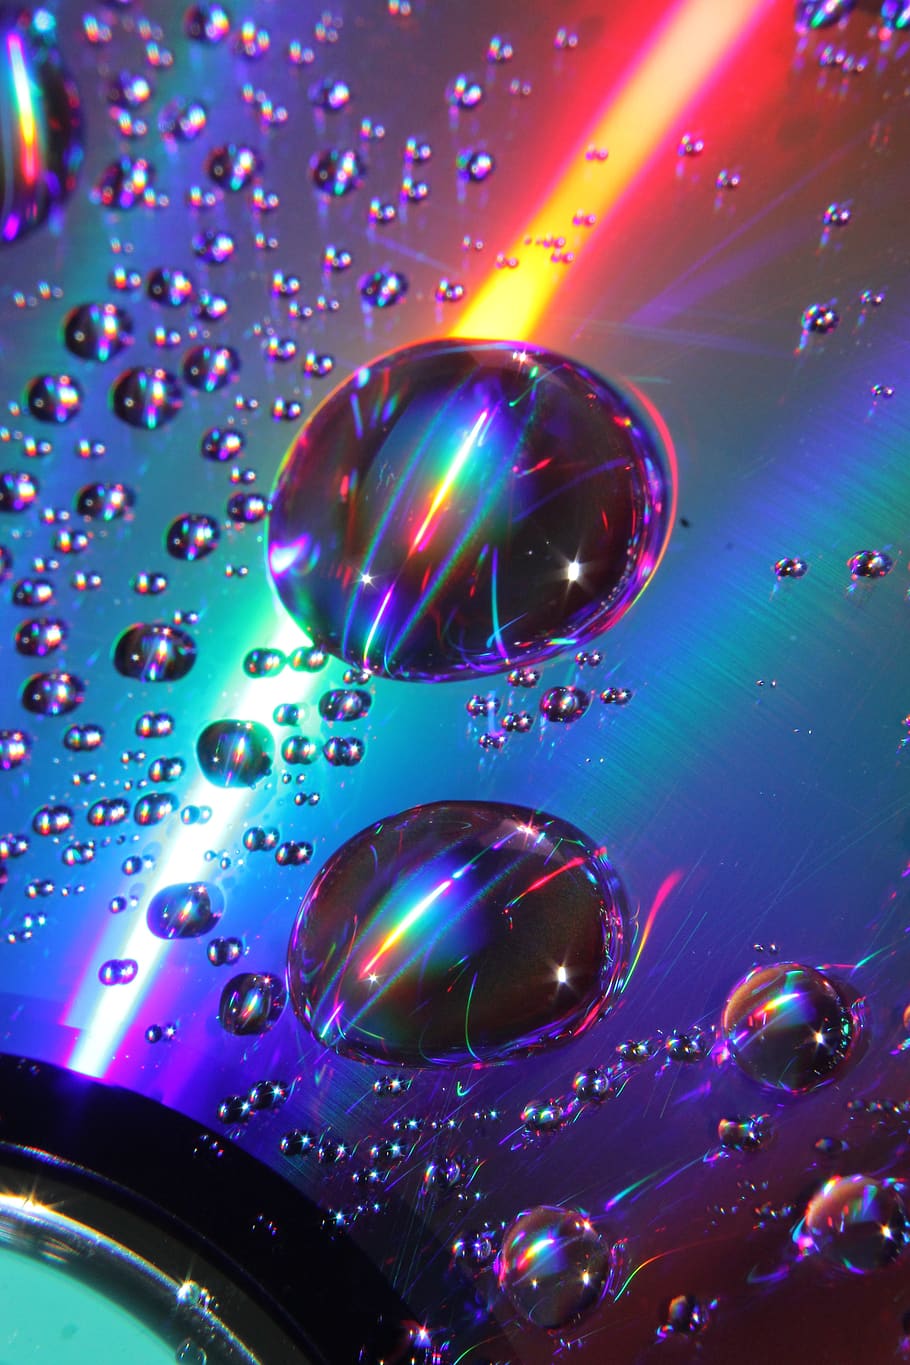 drops of water, music, violet, light, reflection, multi colored, sphere, close-up, indoors, disco ball